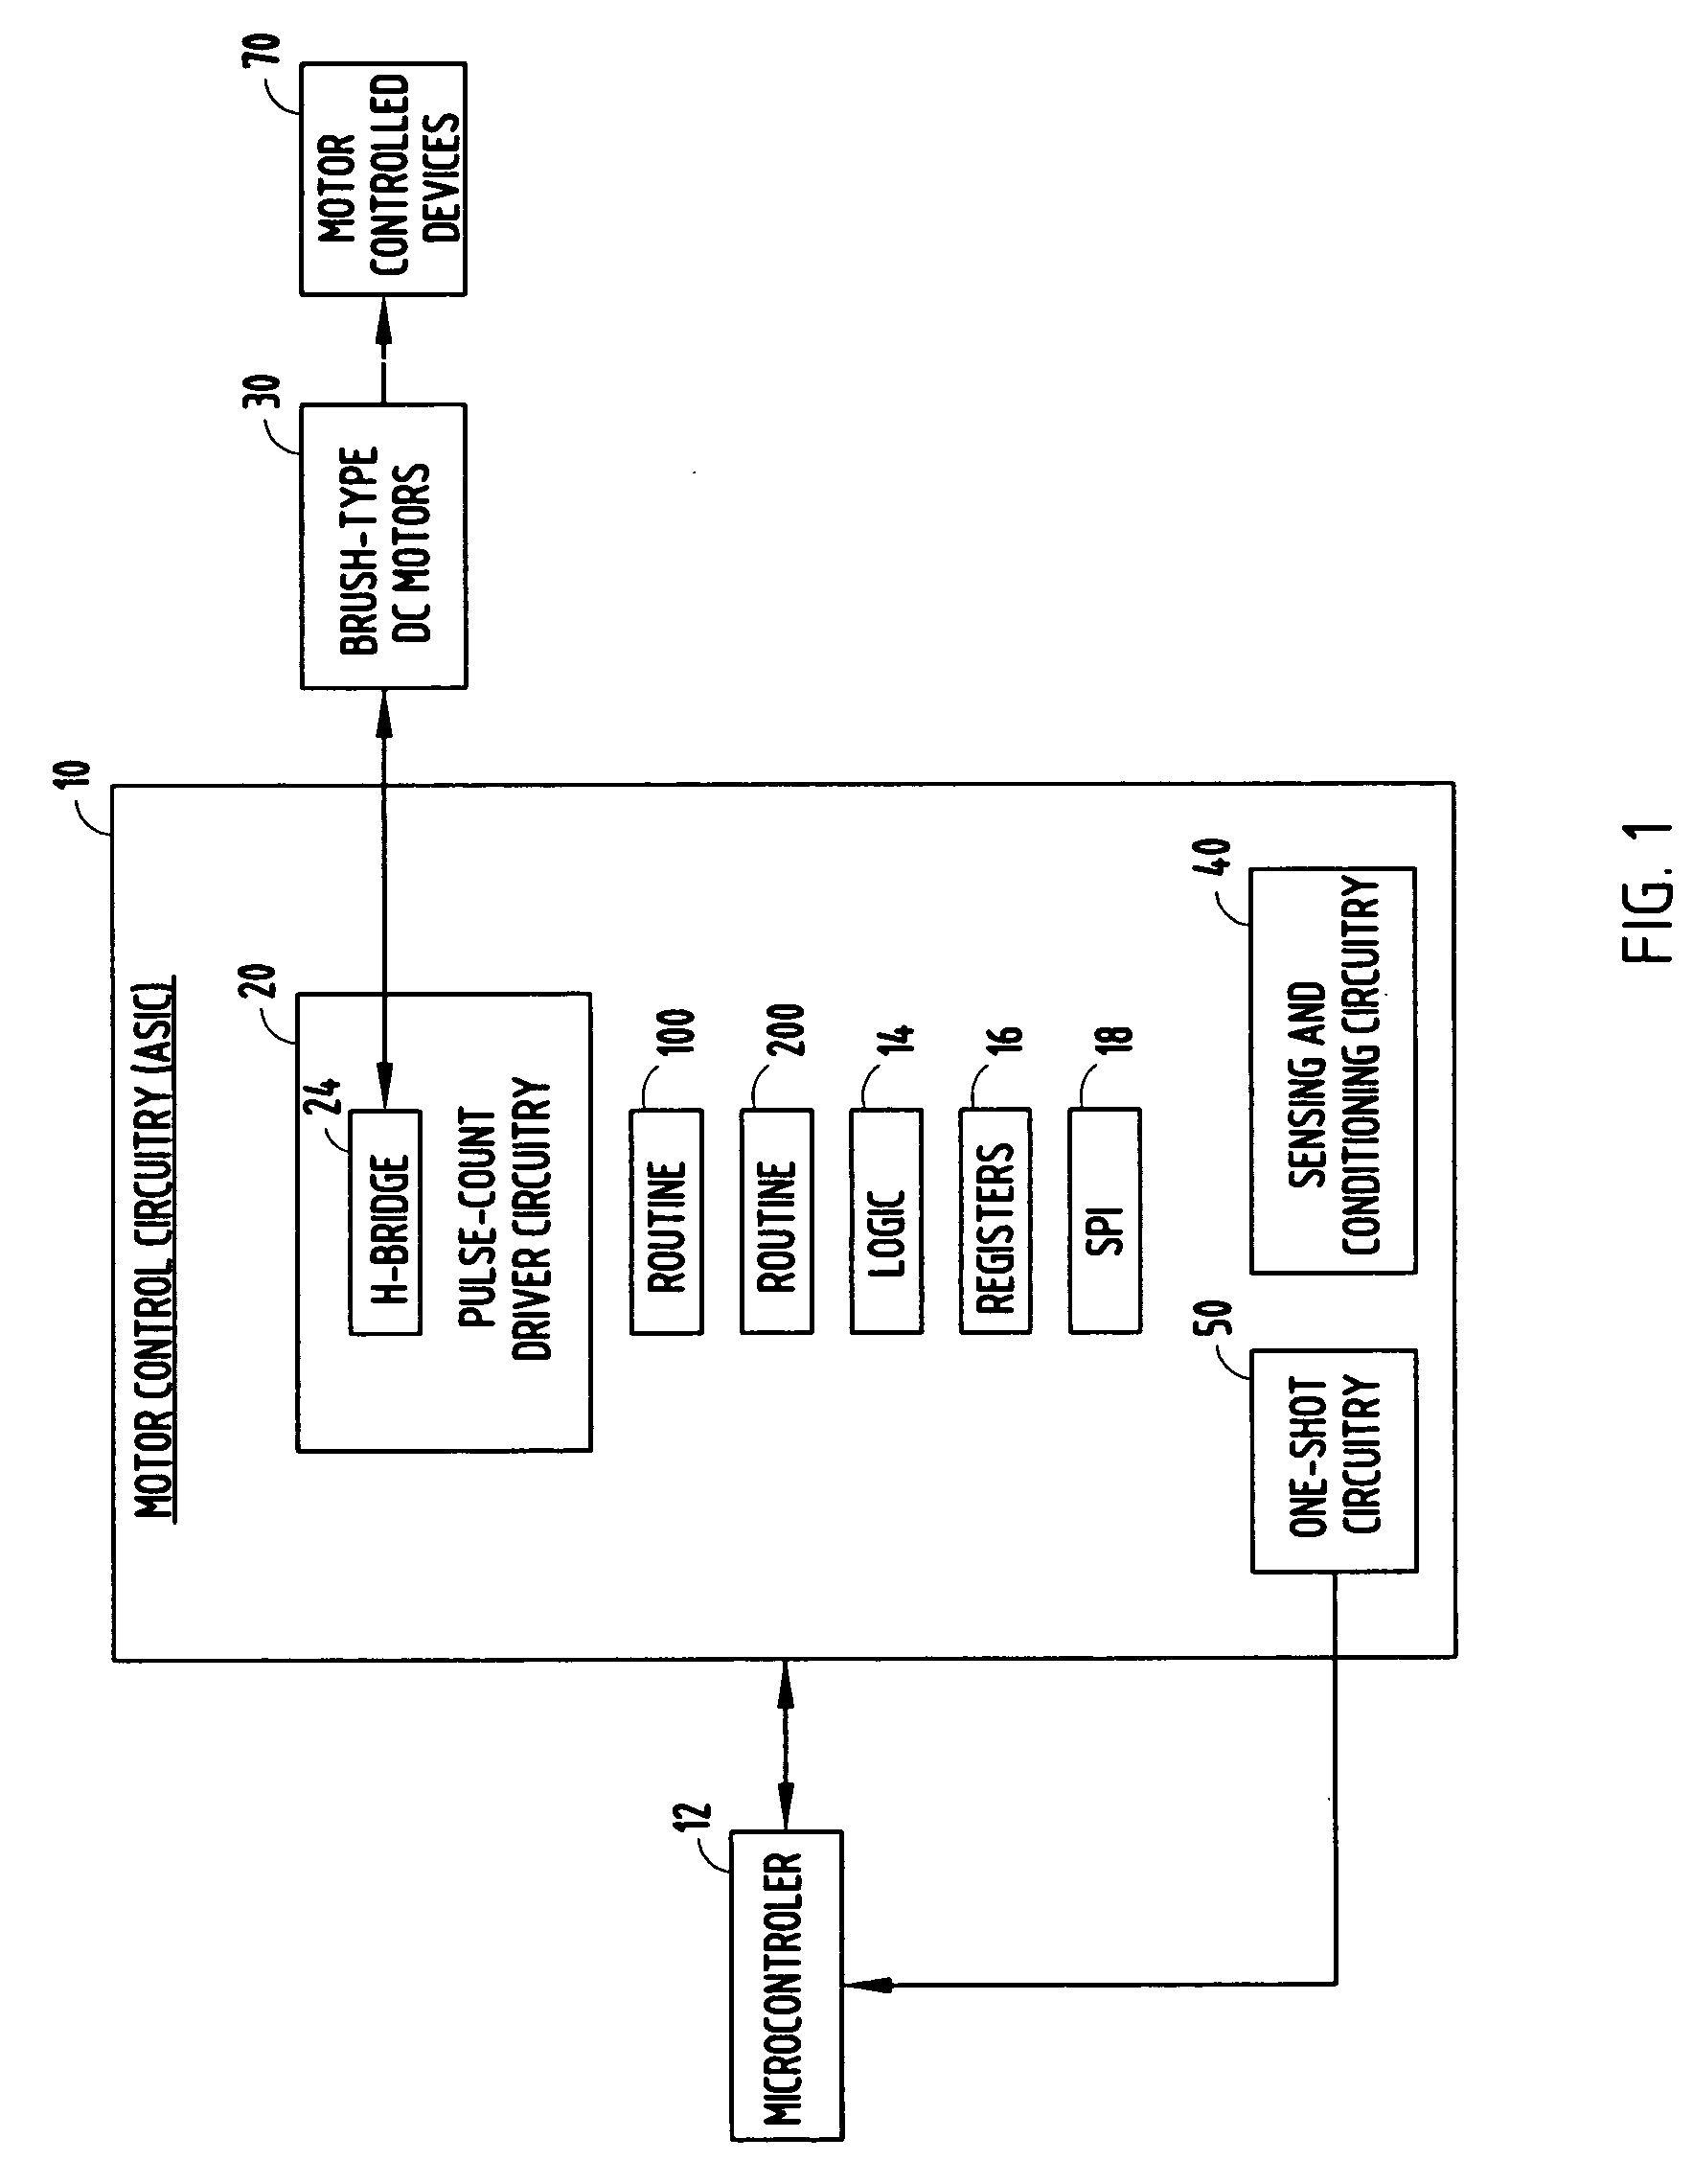 Method of brake pulse rejection in commutation pulse detection circuits